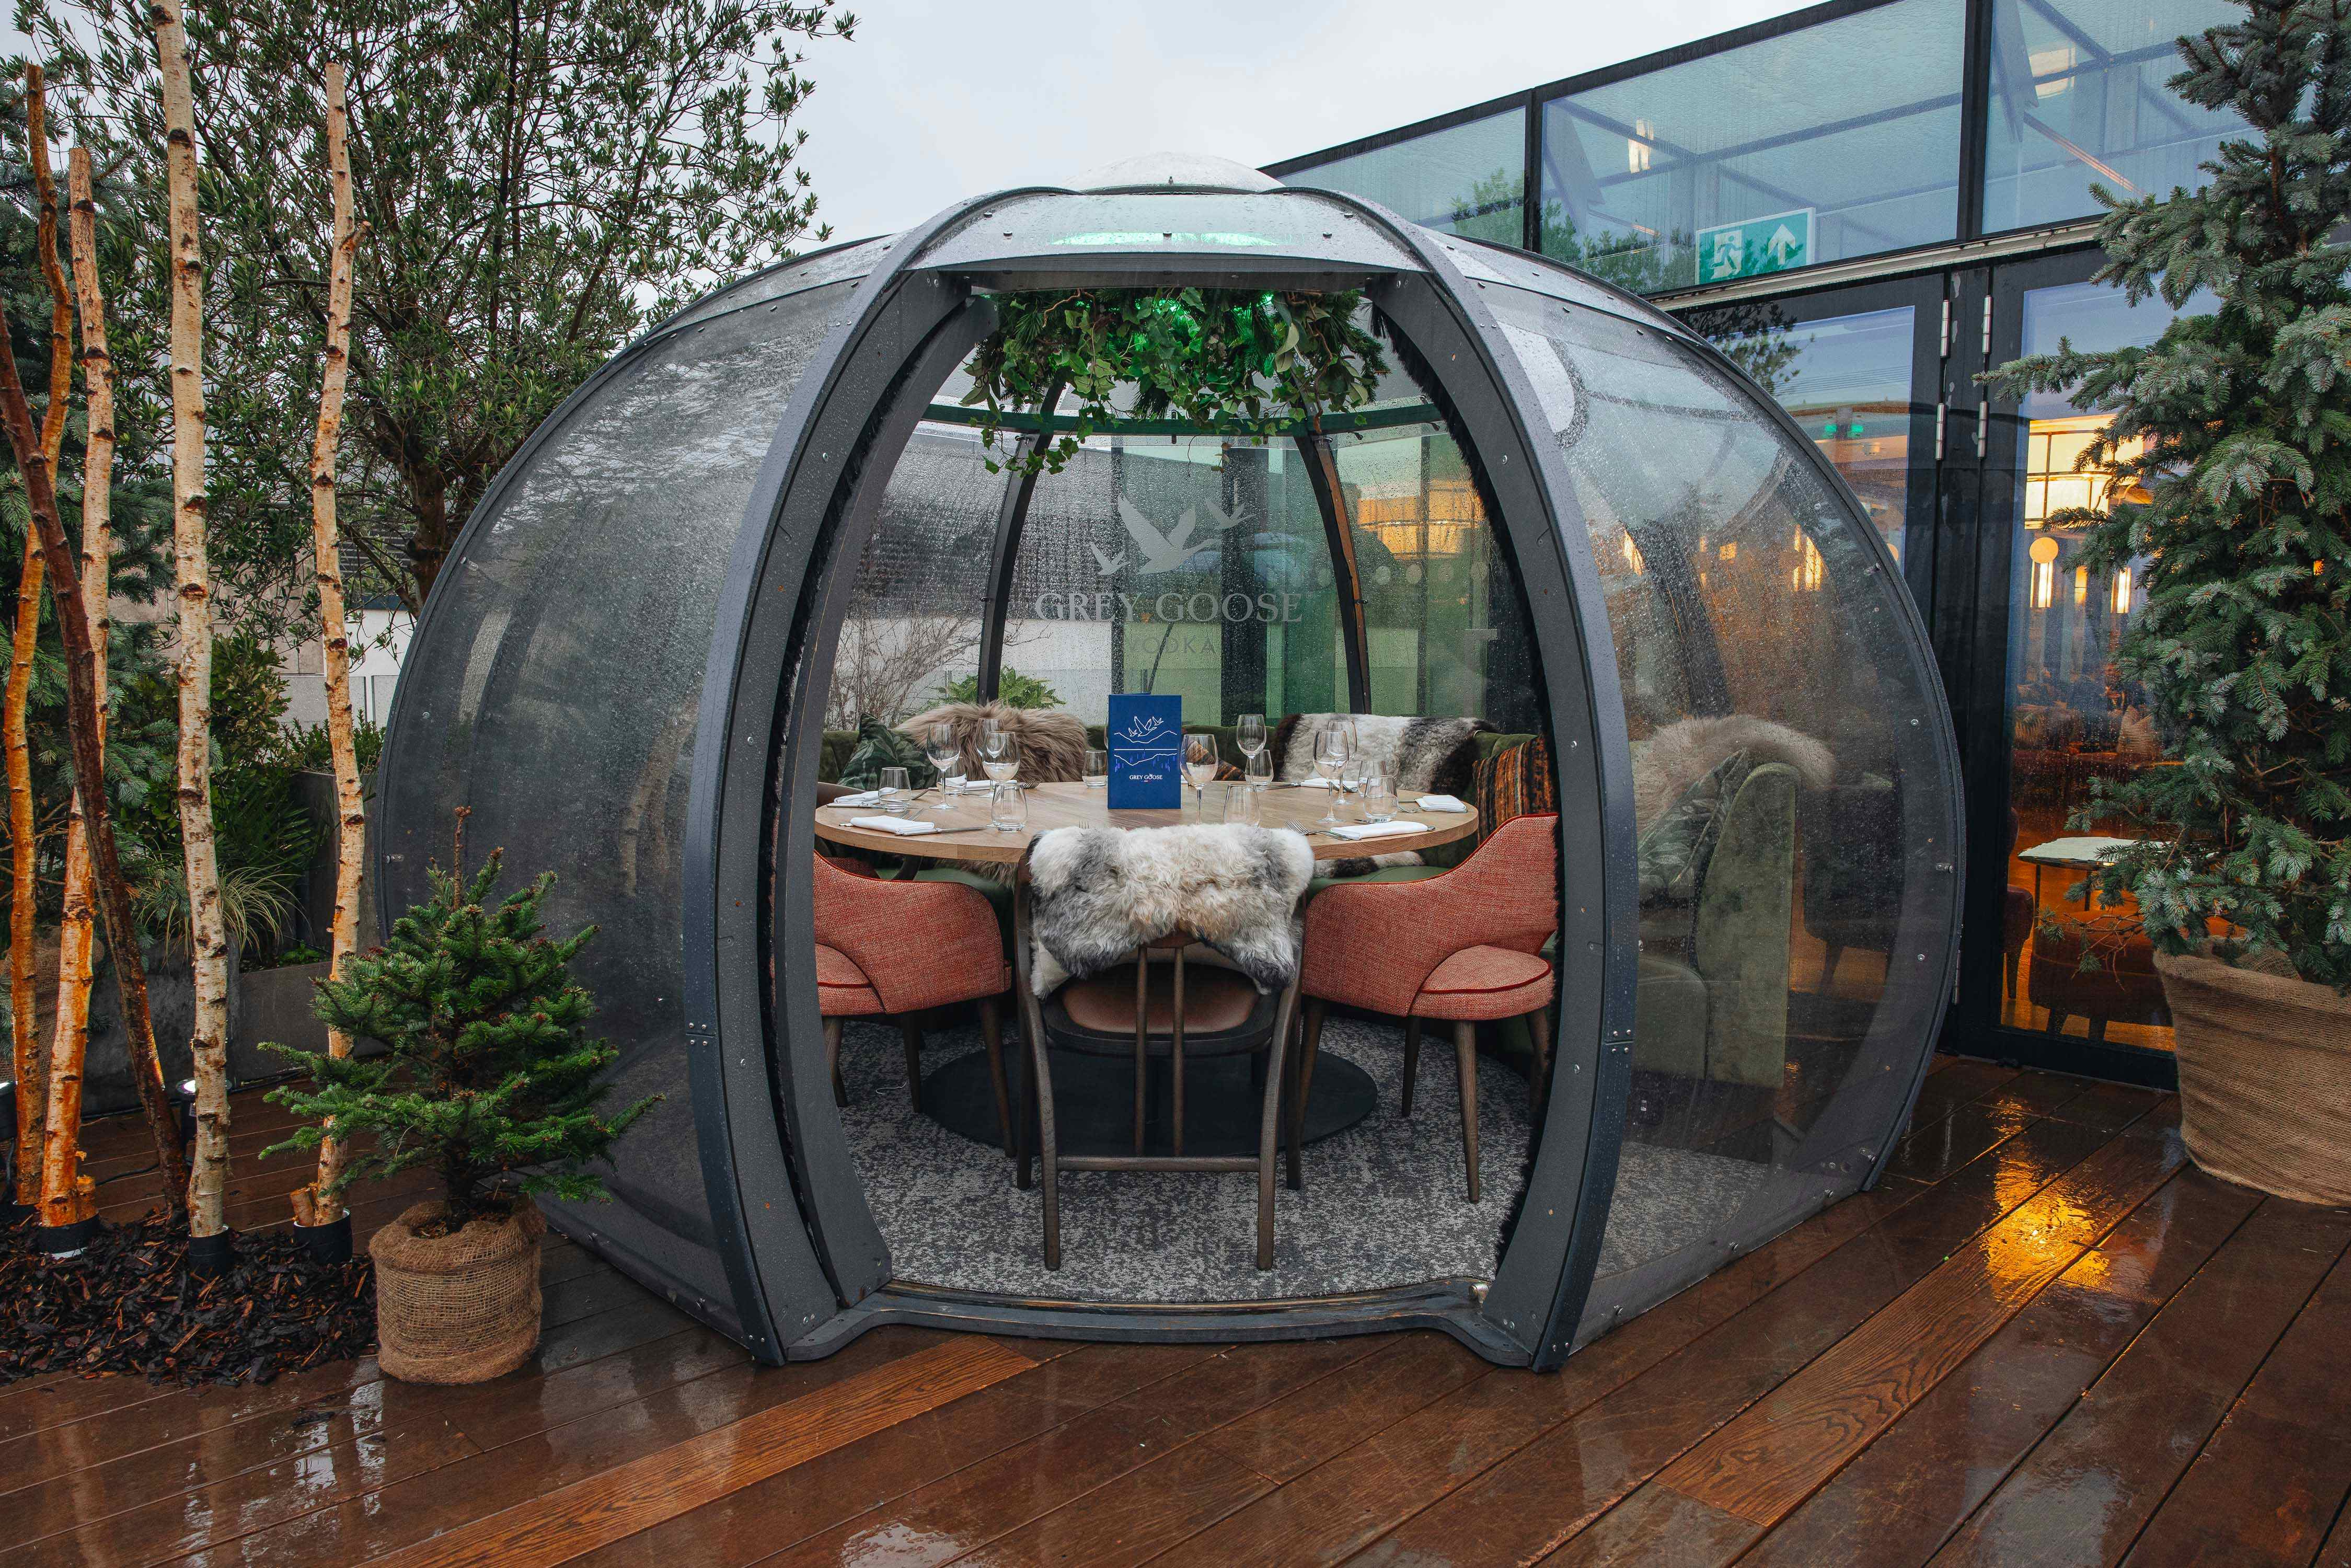 Private Igloo, Aviary Rooftop Restaurant and Bar